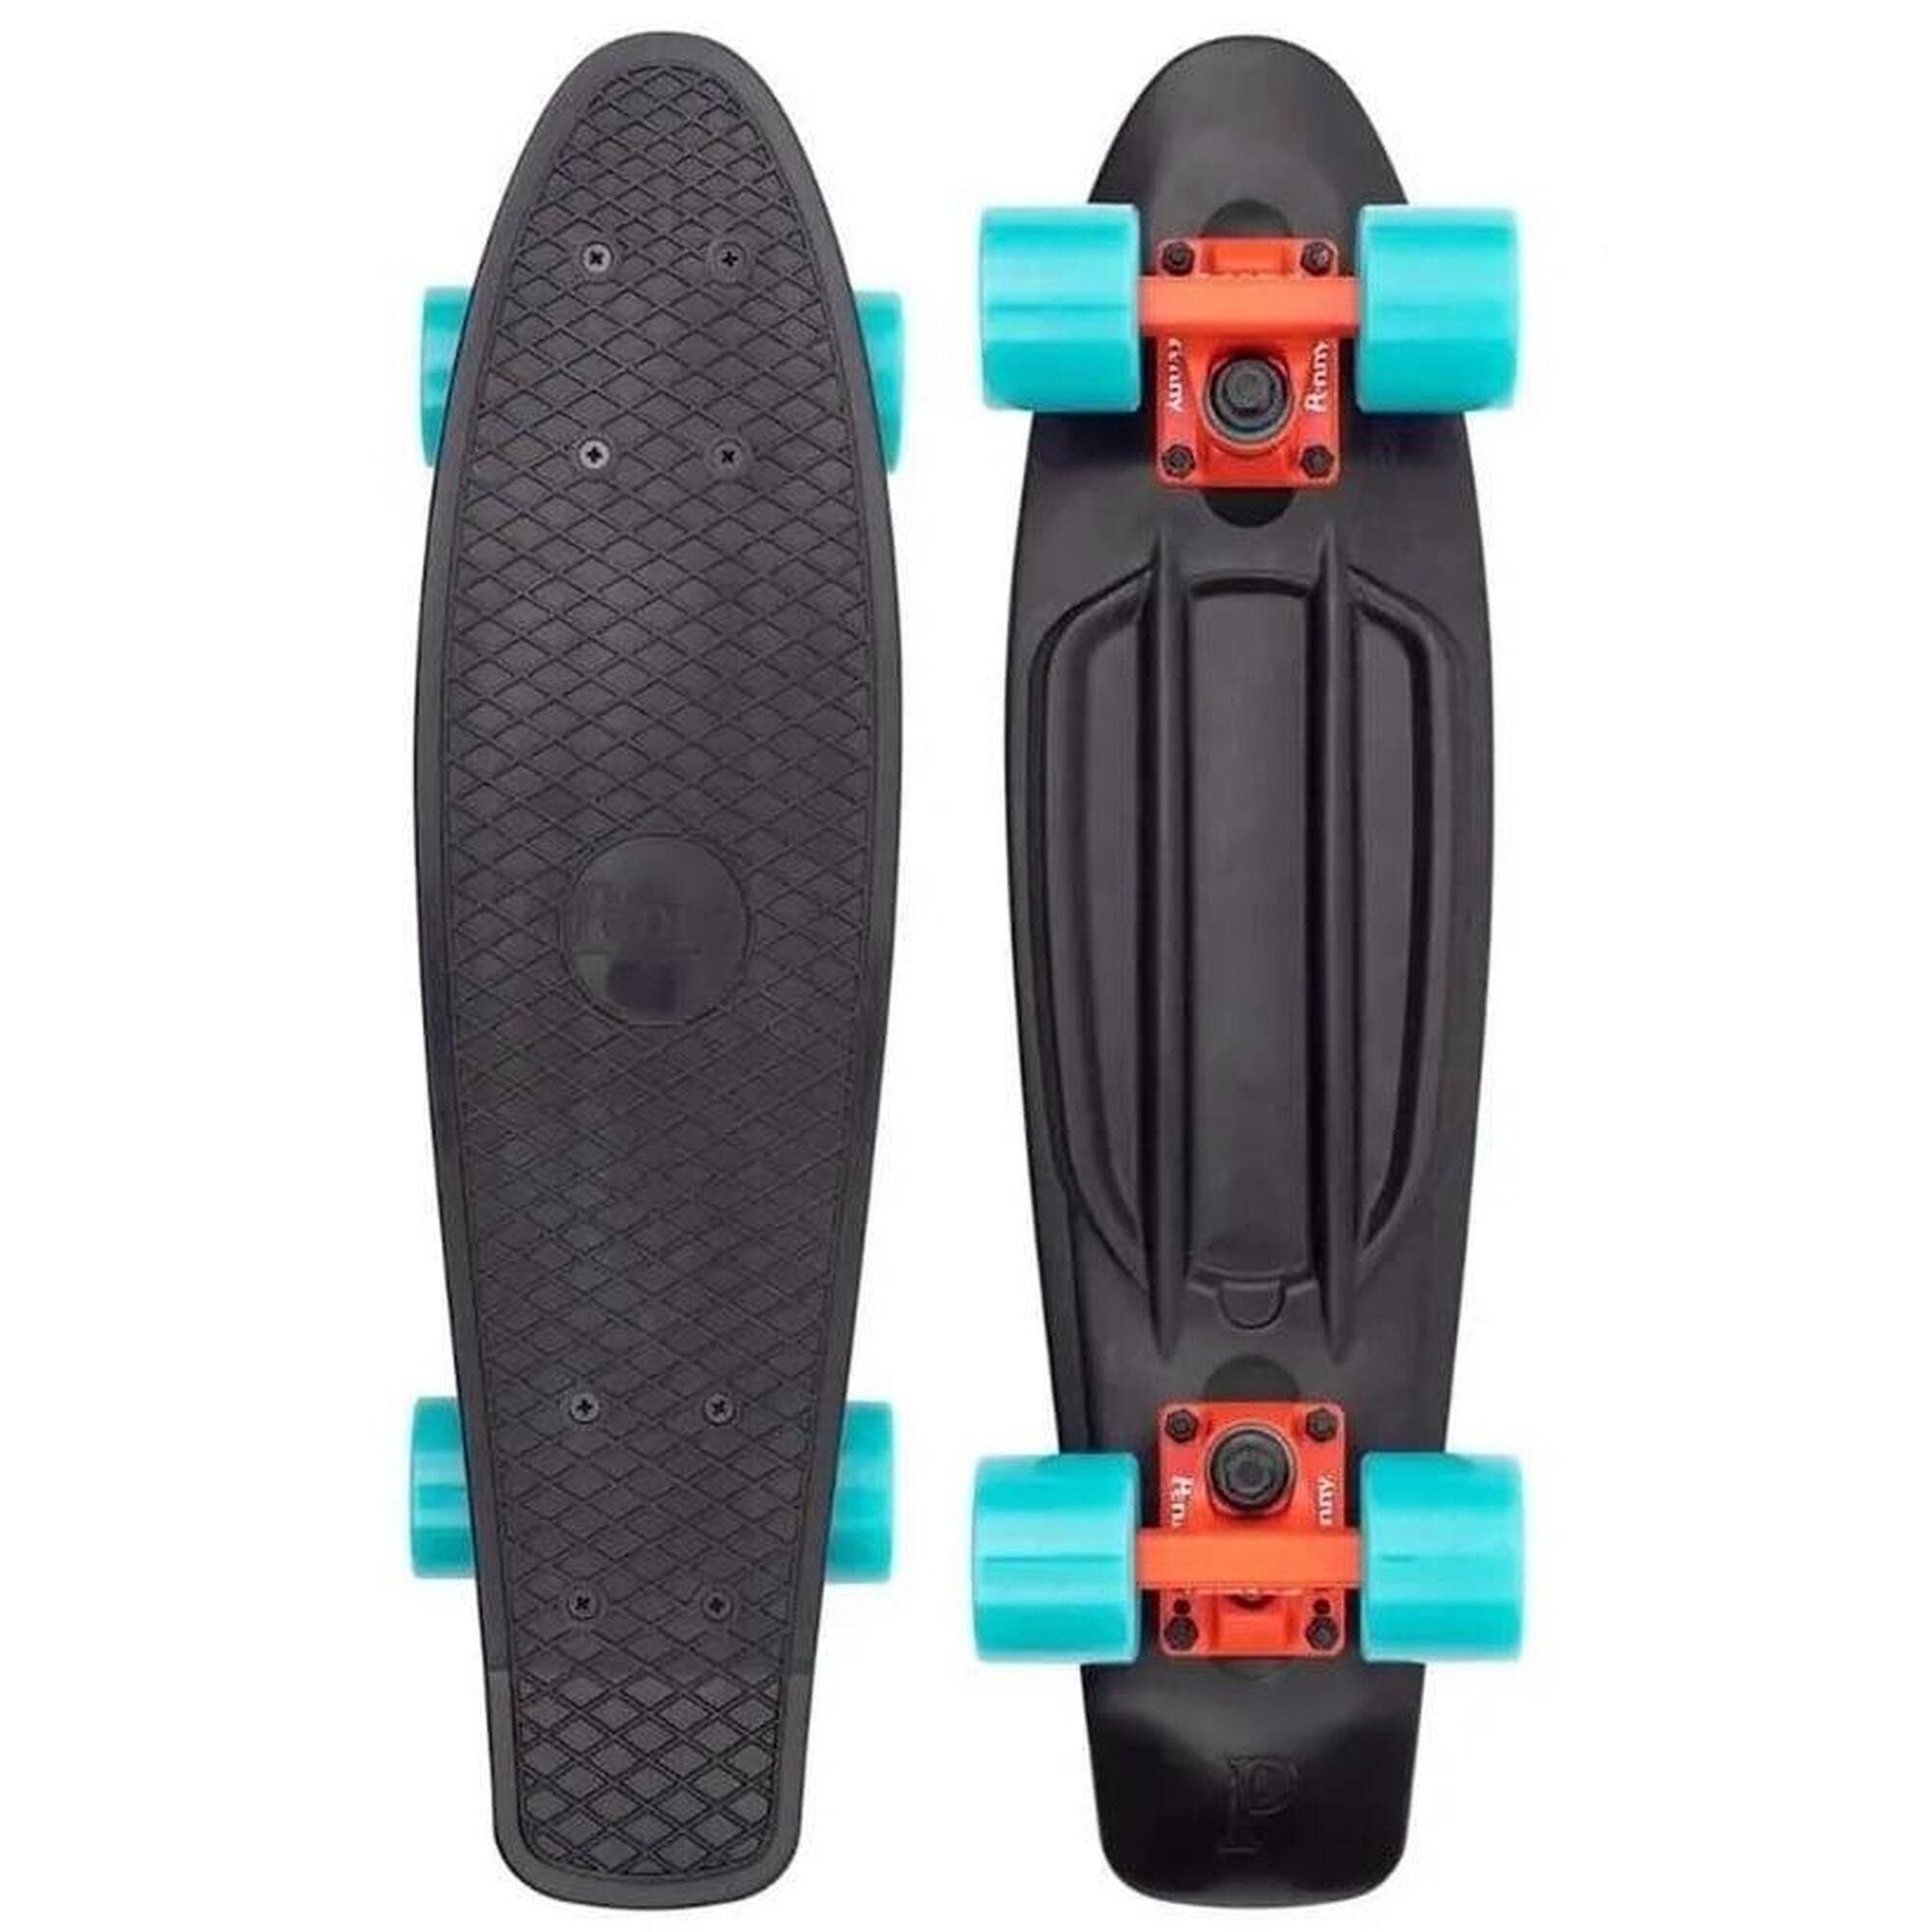 Penny Board 27 Bright Light Black Turquoise